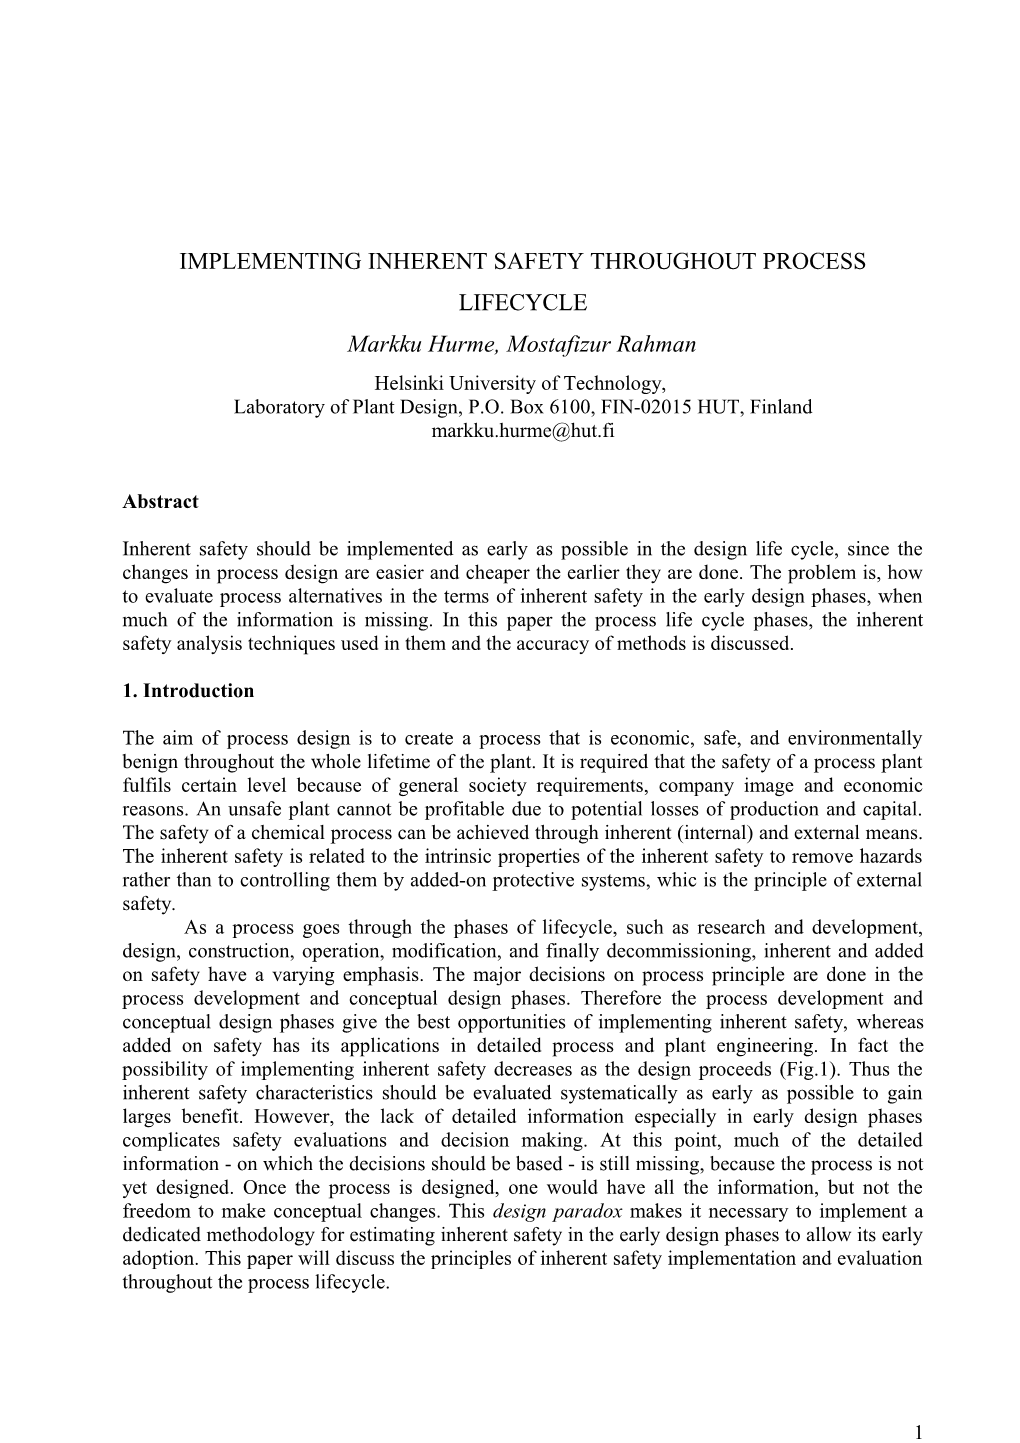 Application of Inherent Safety Index to Mma Process Evaluation